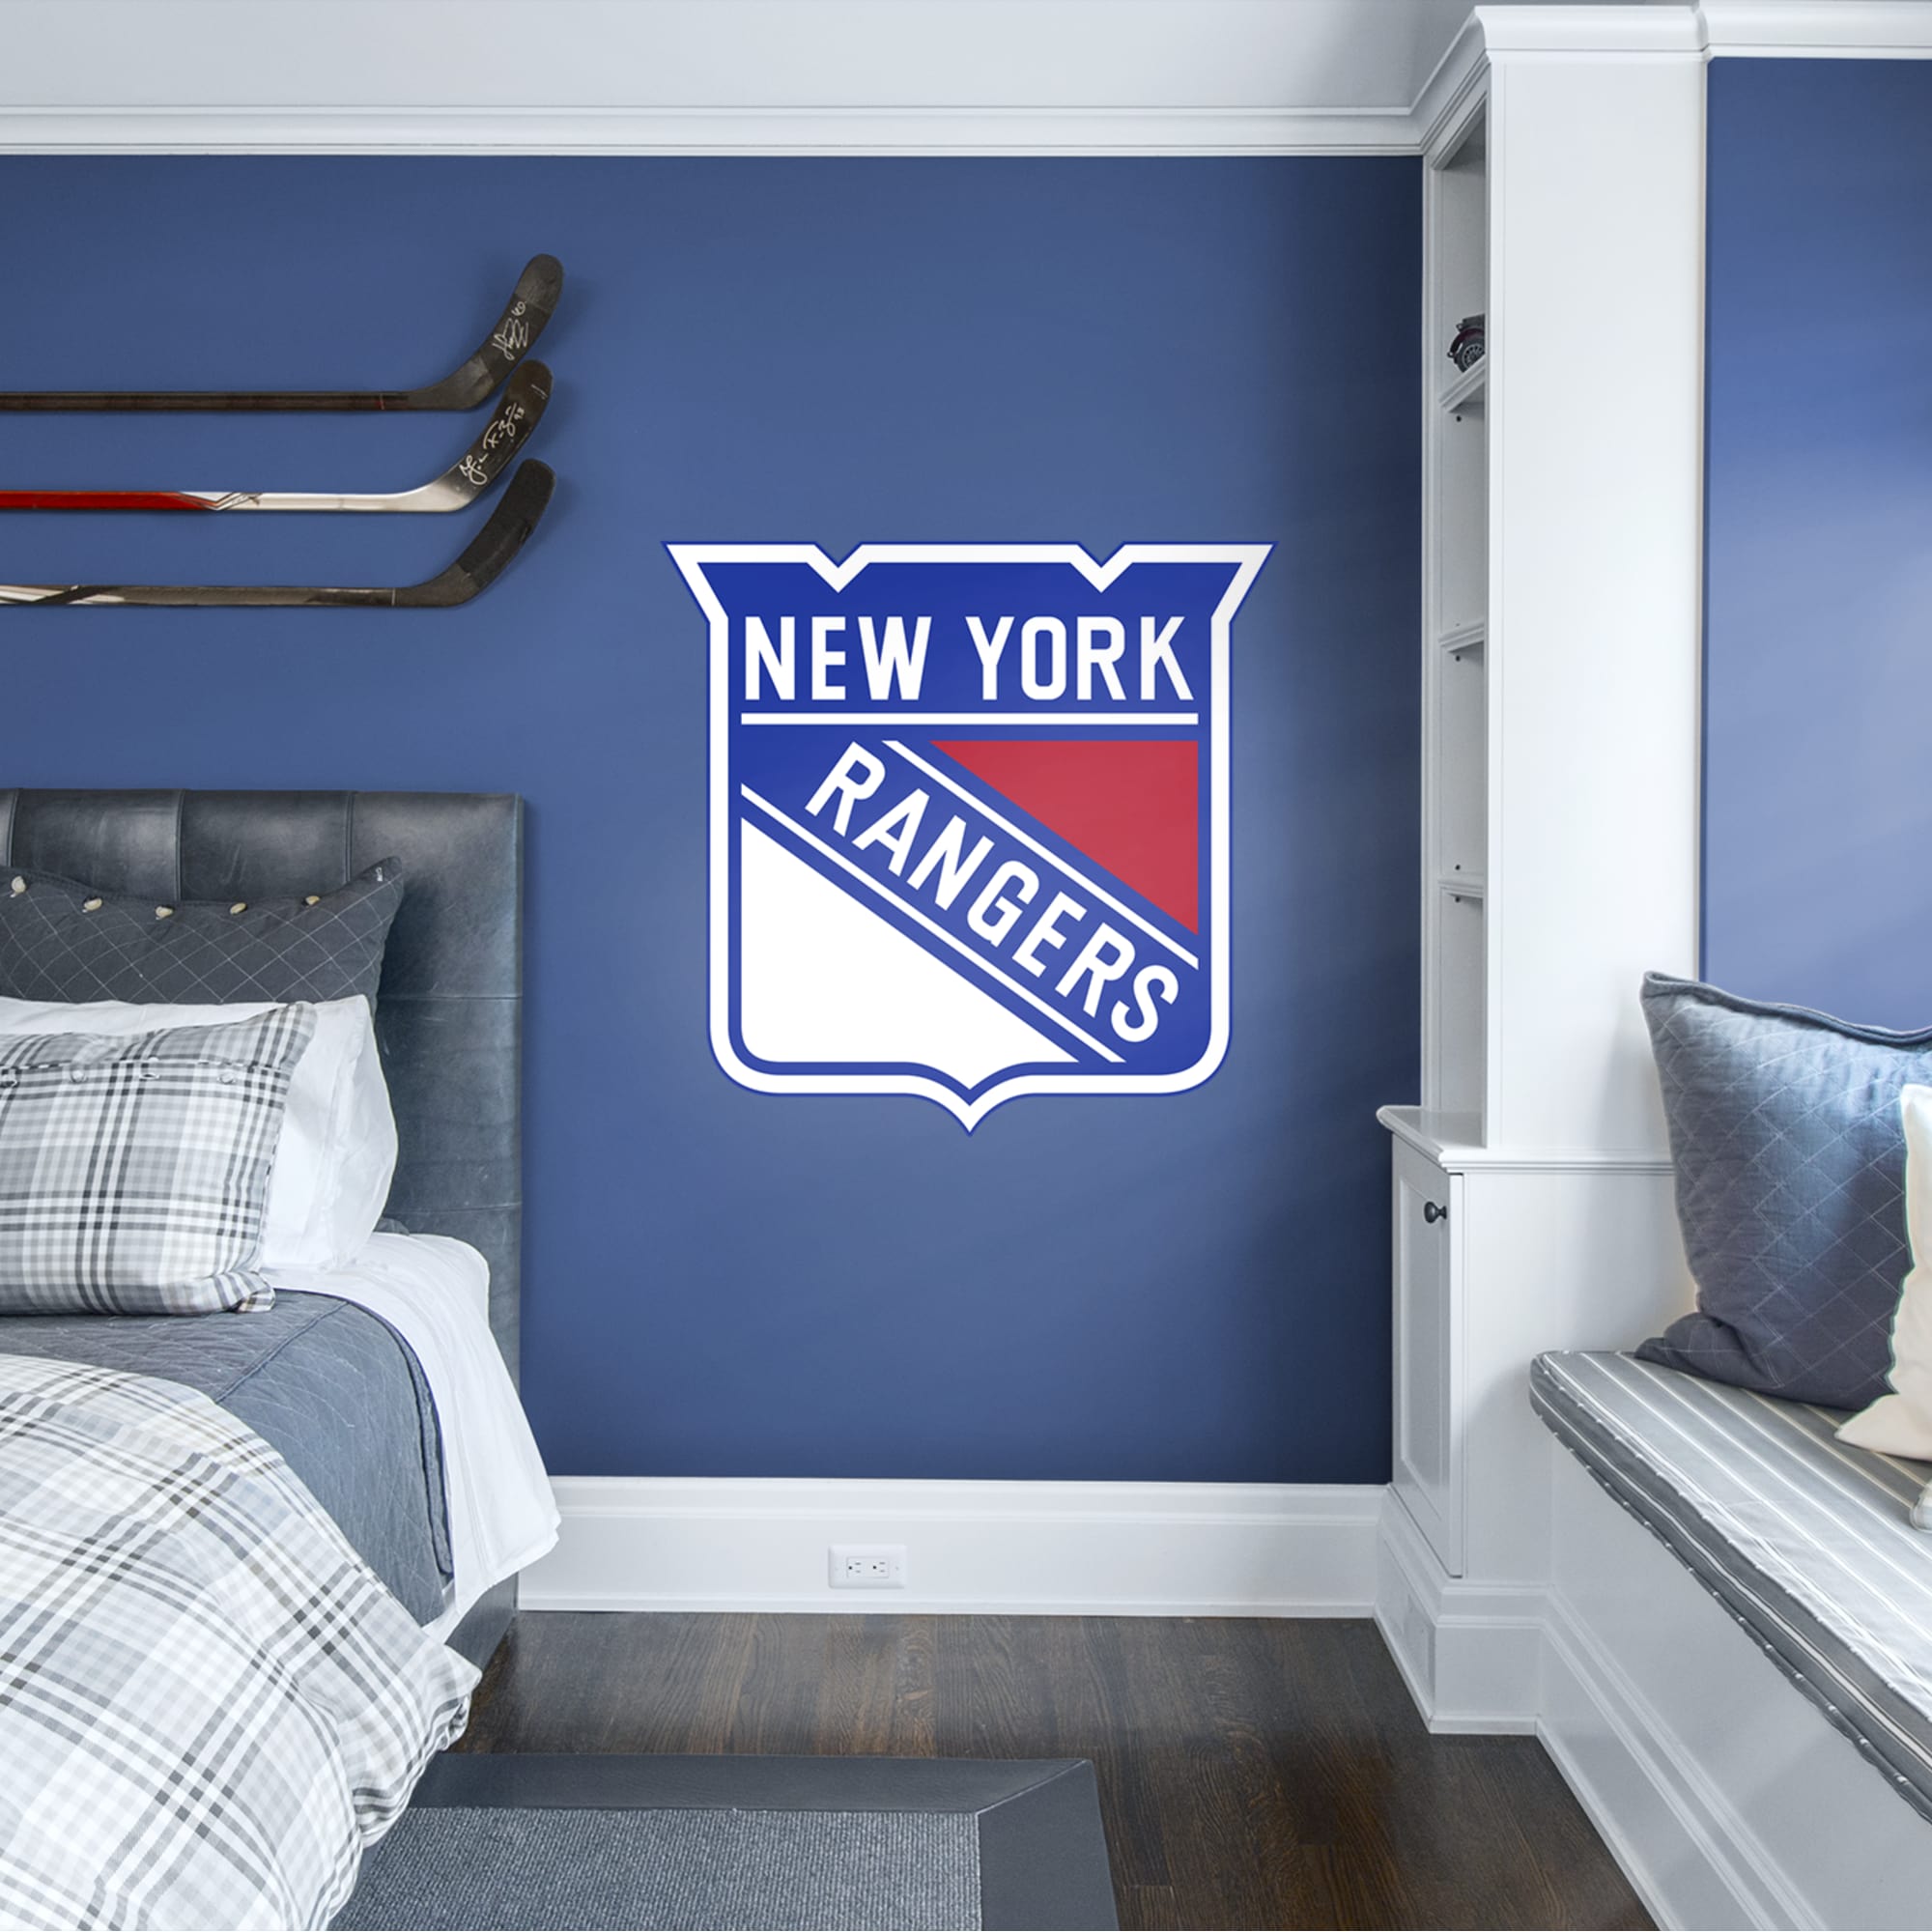 New York Rangers: Logo - Officially Licensed NHL Removable Wall Decal Giant Logo (38"W x 37"H) by Fathead | Vinyl